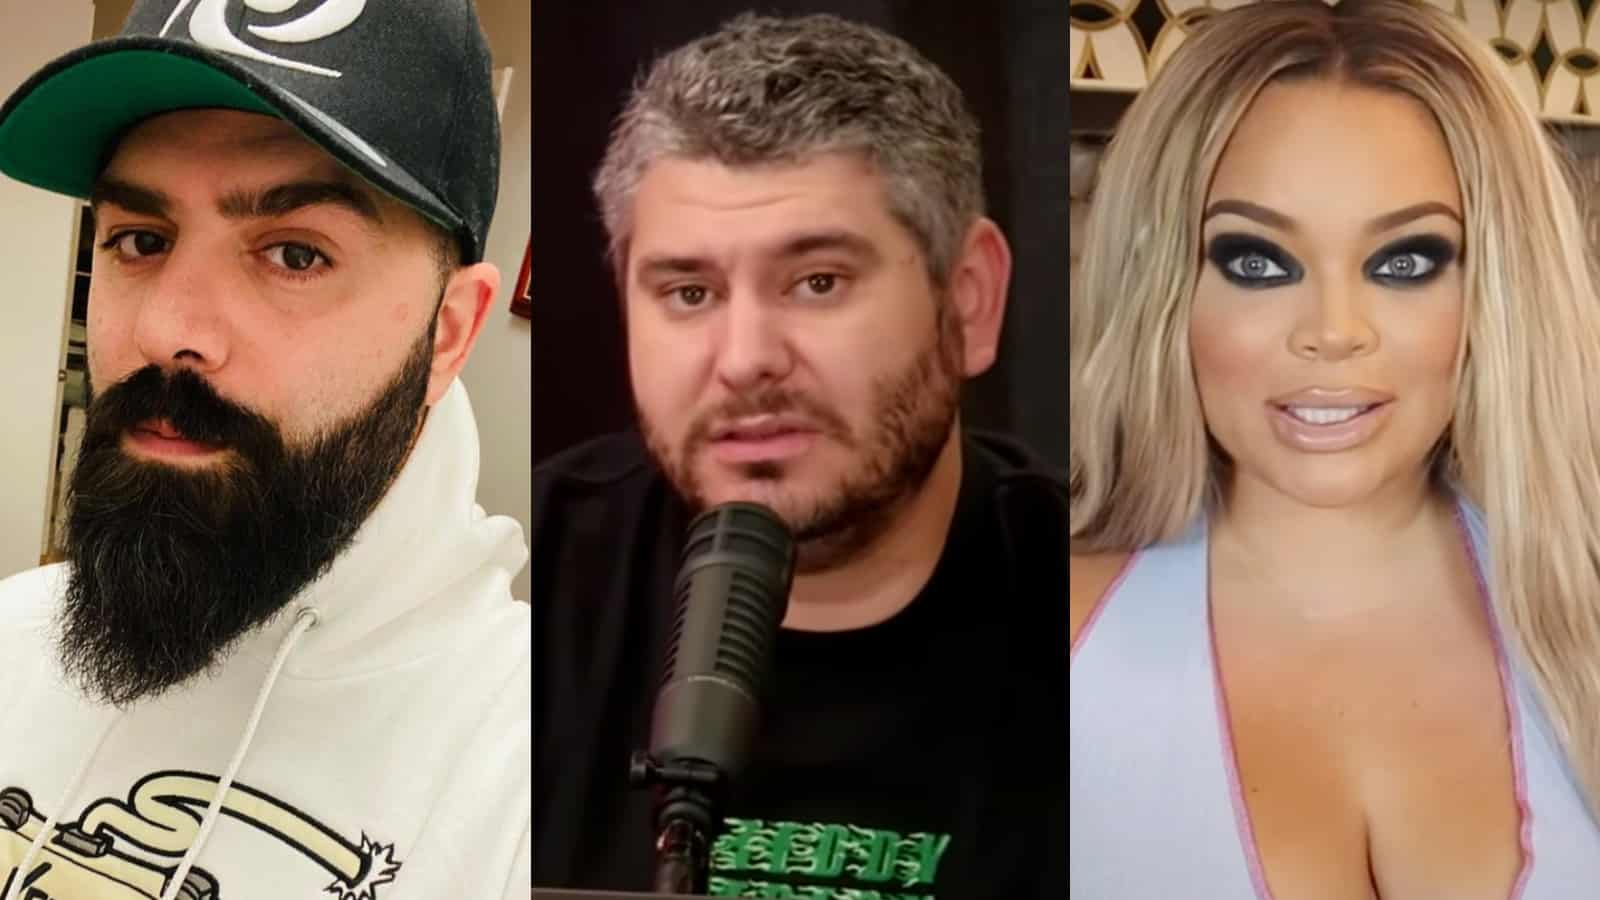 Keemstar,, Ethan Klein, and Trisha Paytas next to each other